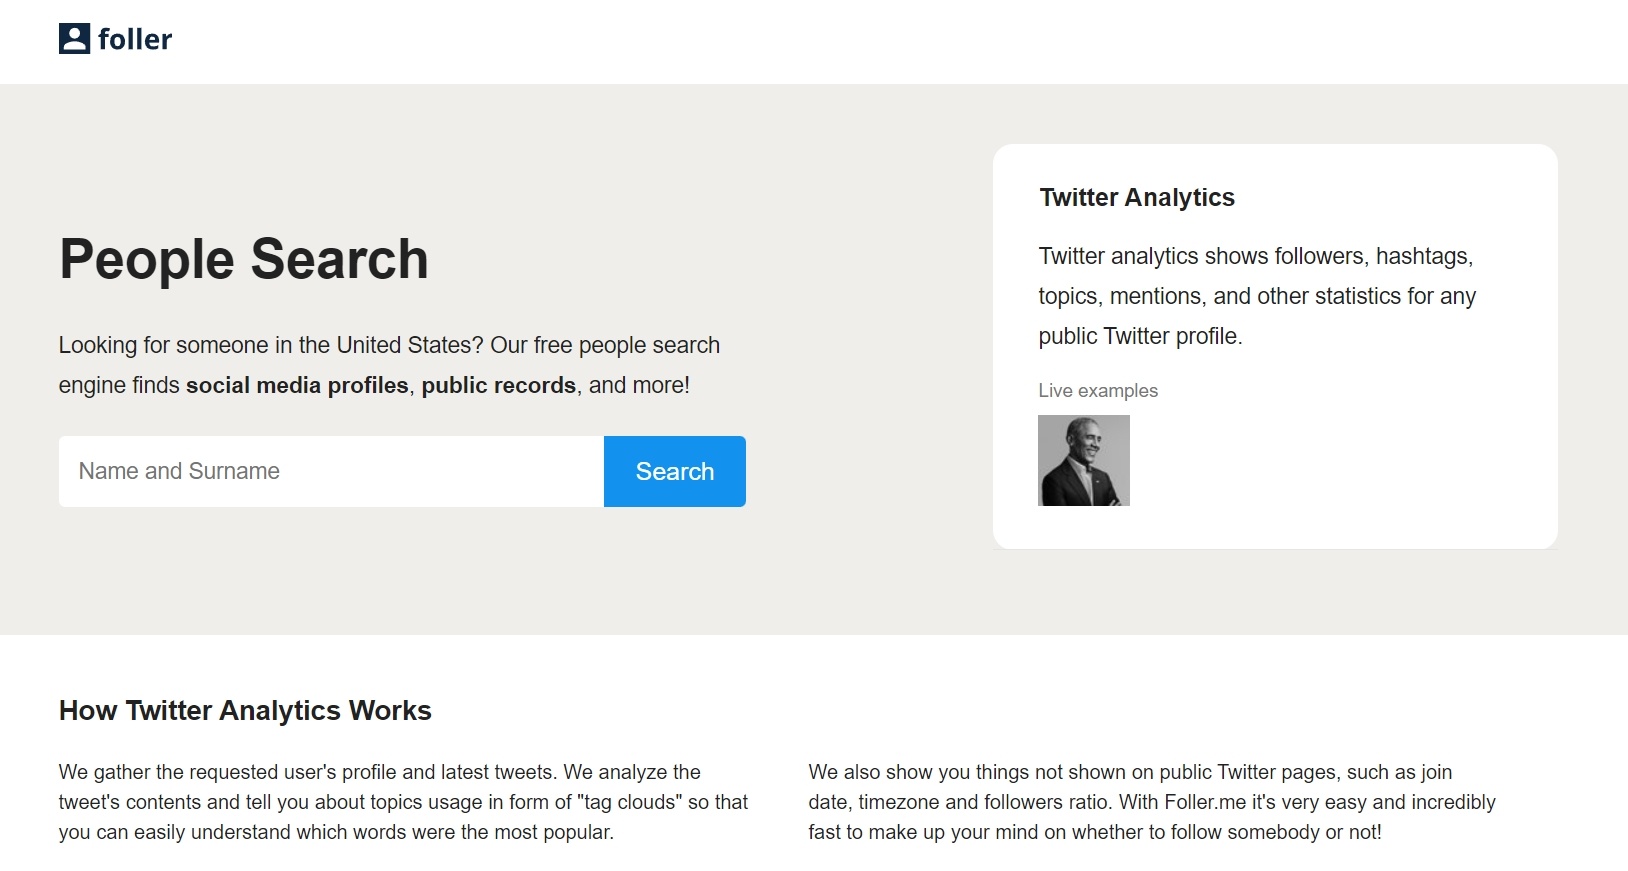 Foller.me with analytics for your Twitter account